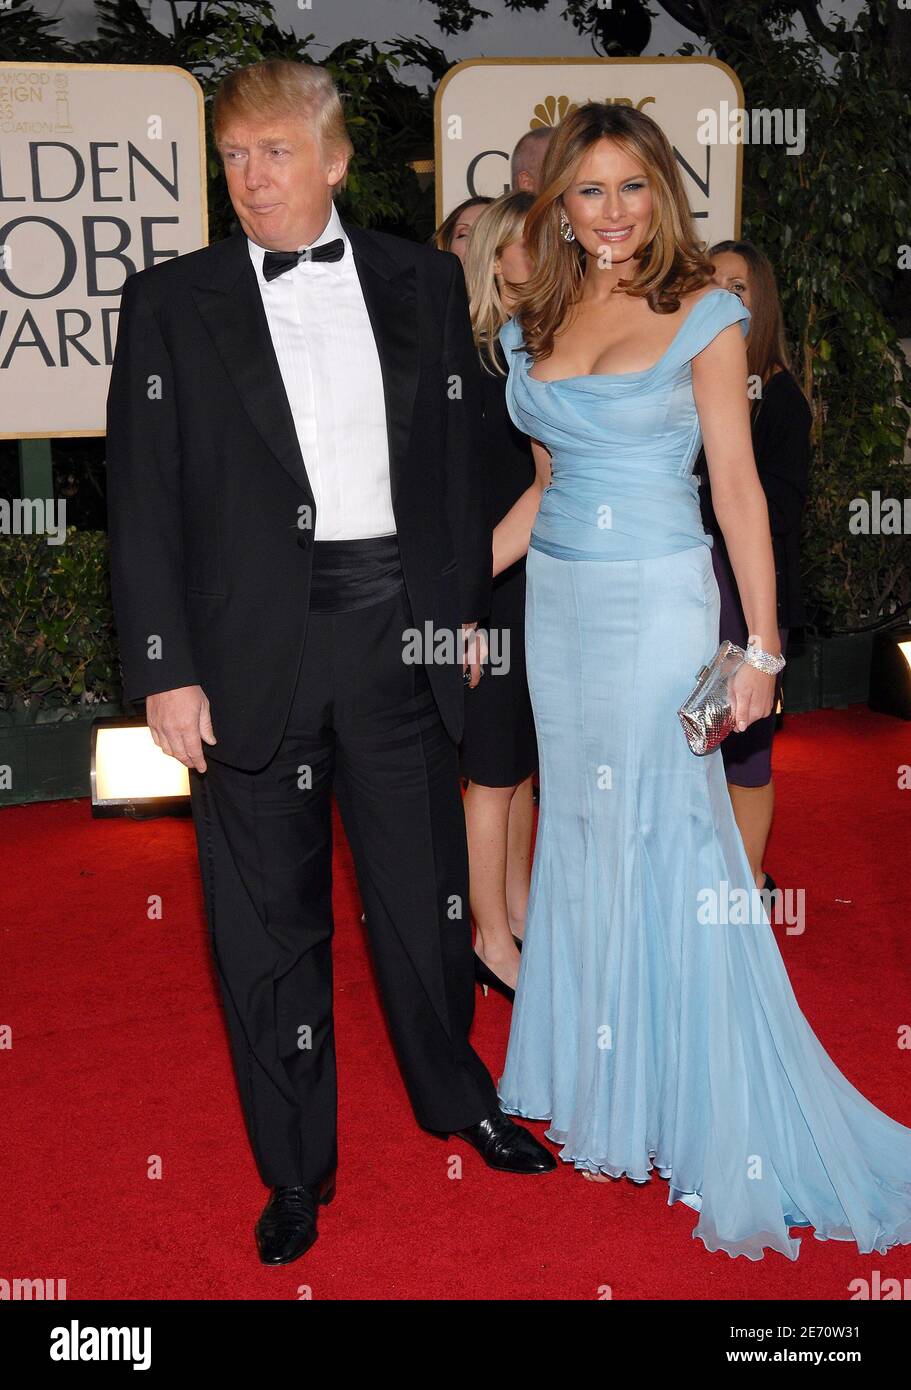 Donald Trump and Melania Krause-Trump pose on the red carpet of the 64th  Annual Golden Globe Awards held at the Beverly Hilton hotel in Los Angeles,  CA, USA on January 15. 2007.